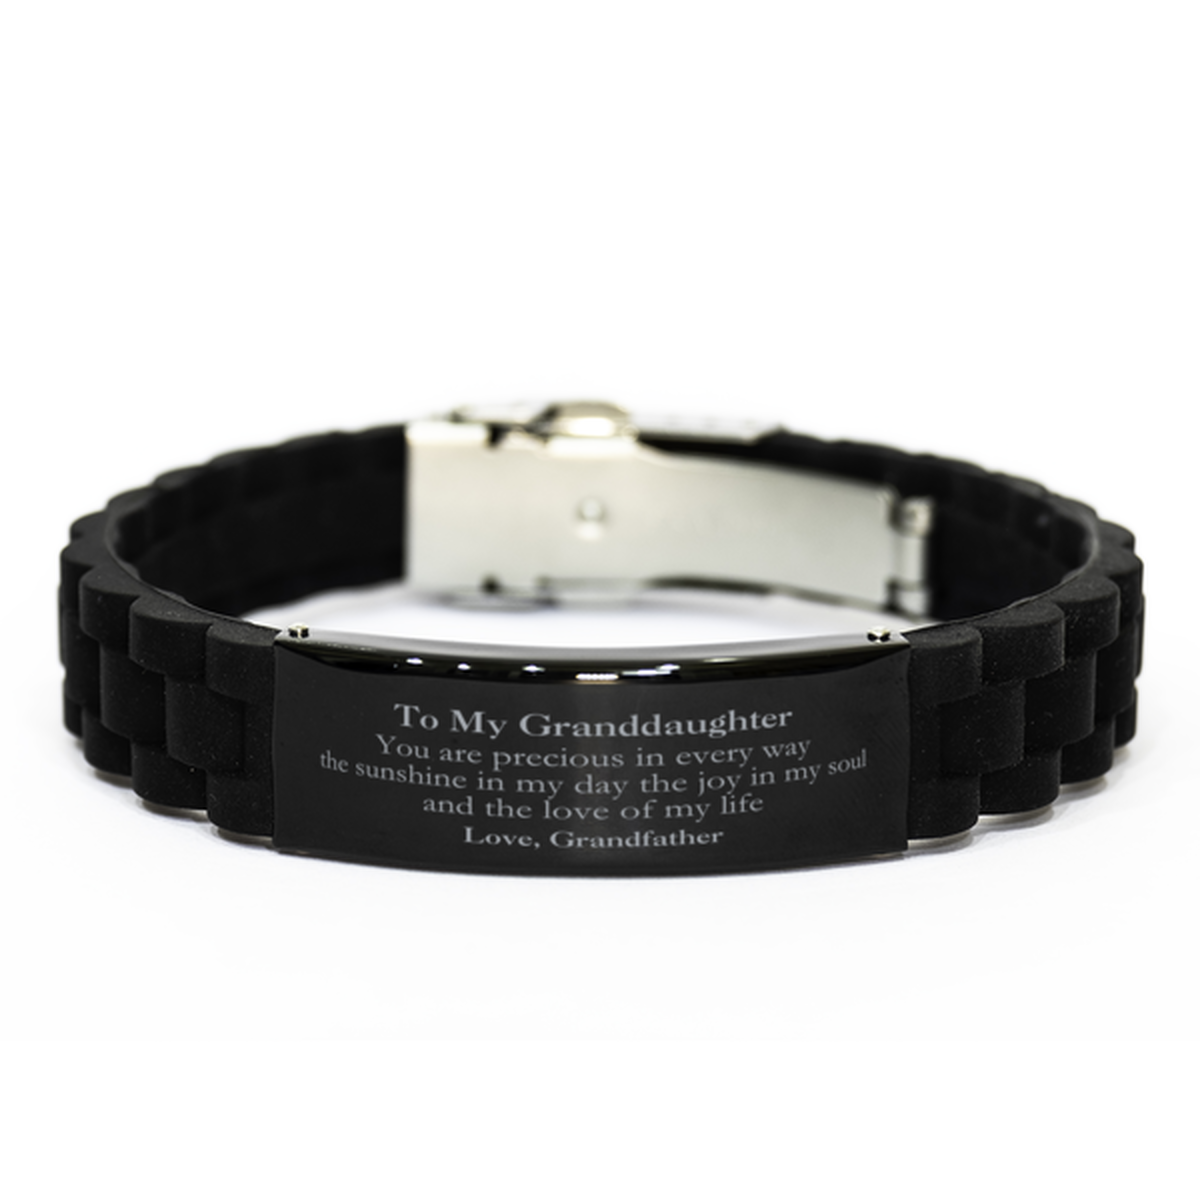 Graduation Gifts for Granddaughter Black Glidelock Clasp Bracelet Present from Grandfather, Christmas Granddaughter Birthday Gifts Granddaughter You are precious in every way the sunshine in my day. Love, Grandfather